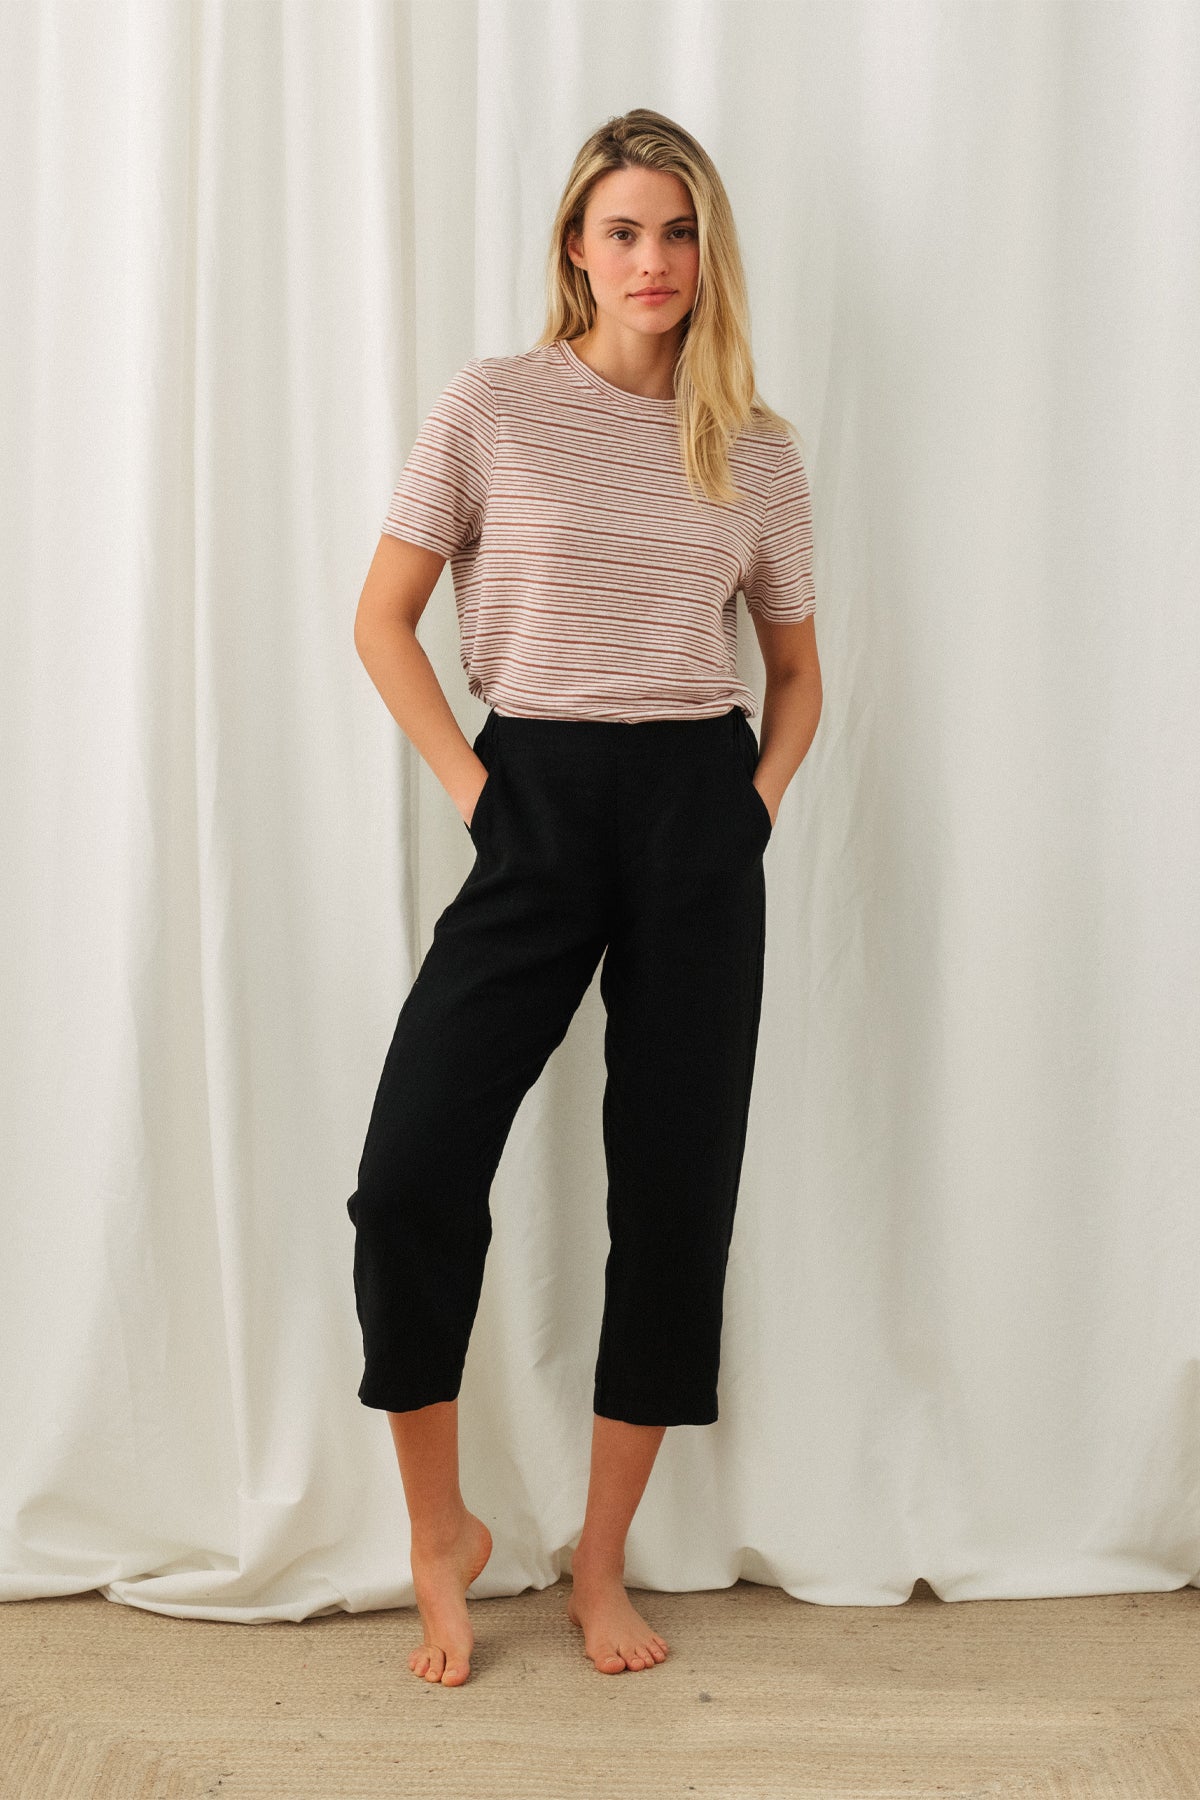 TWOTHIRDS sustainable linen pants